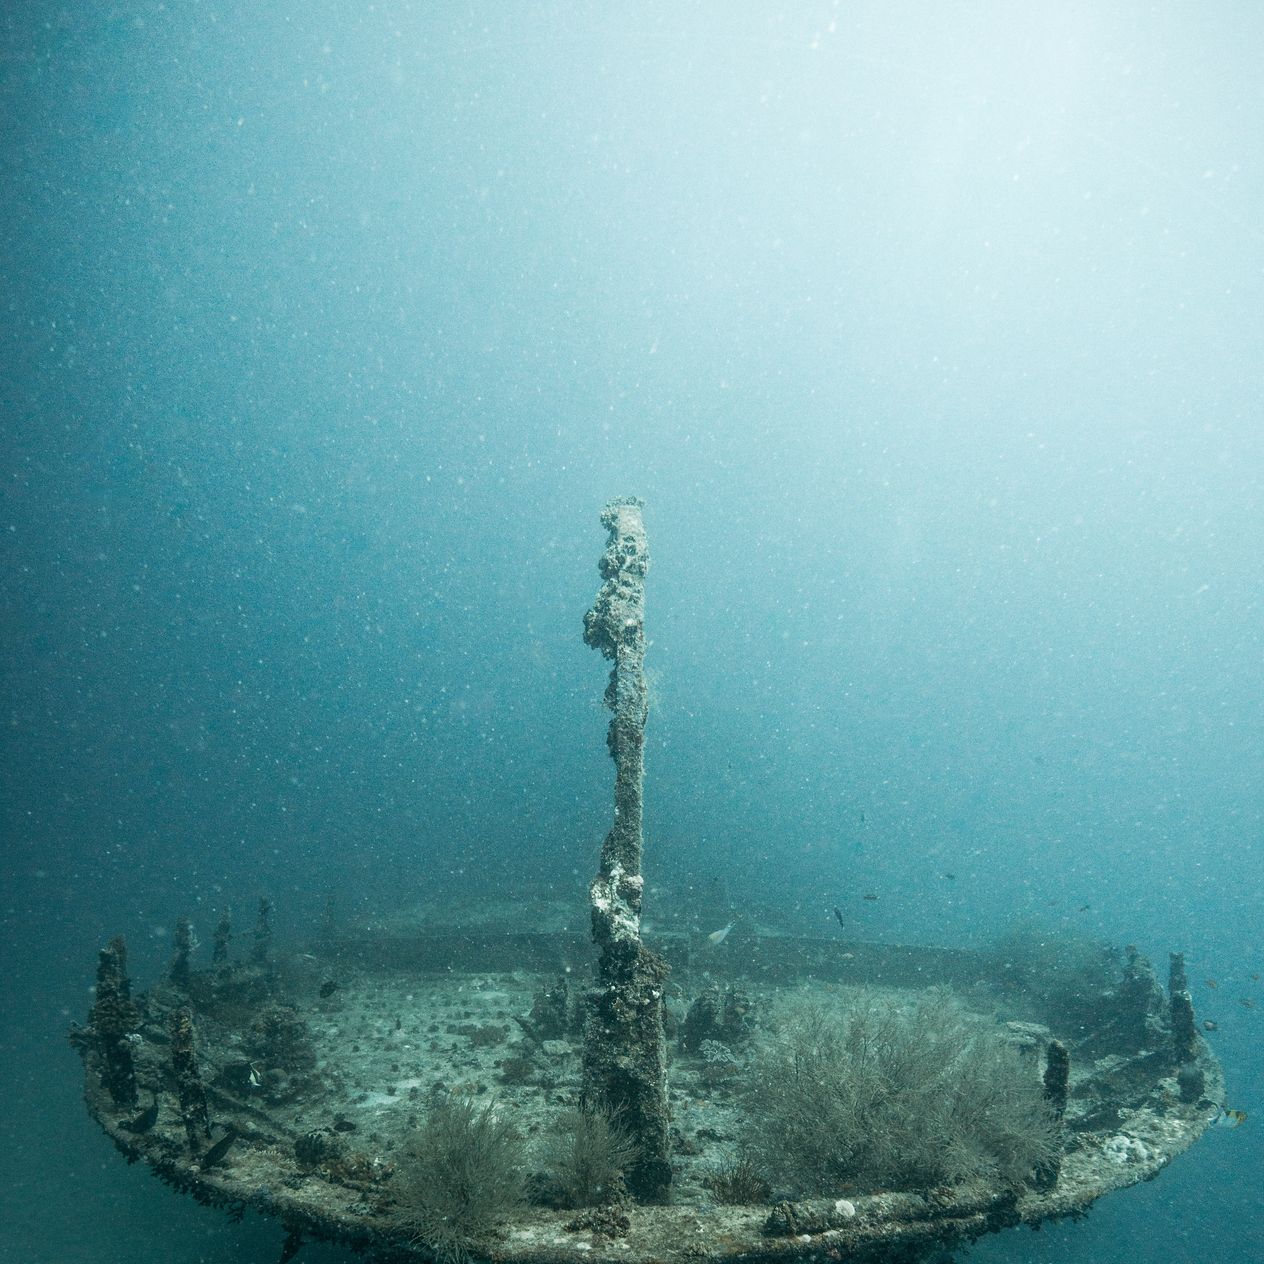 A Father and Daughter Went Fishing—and Accidentally Discovered a 152-Year-Old Shipwreck